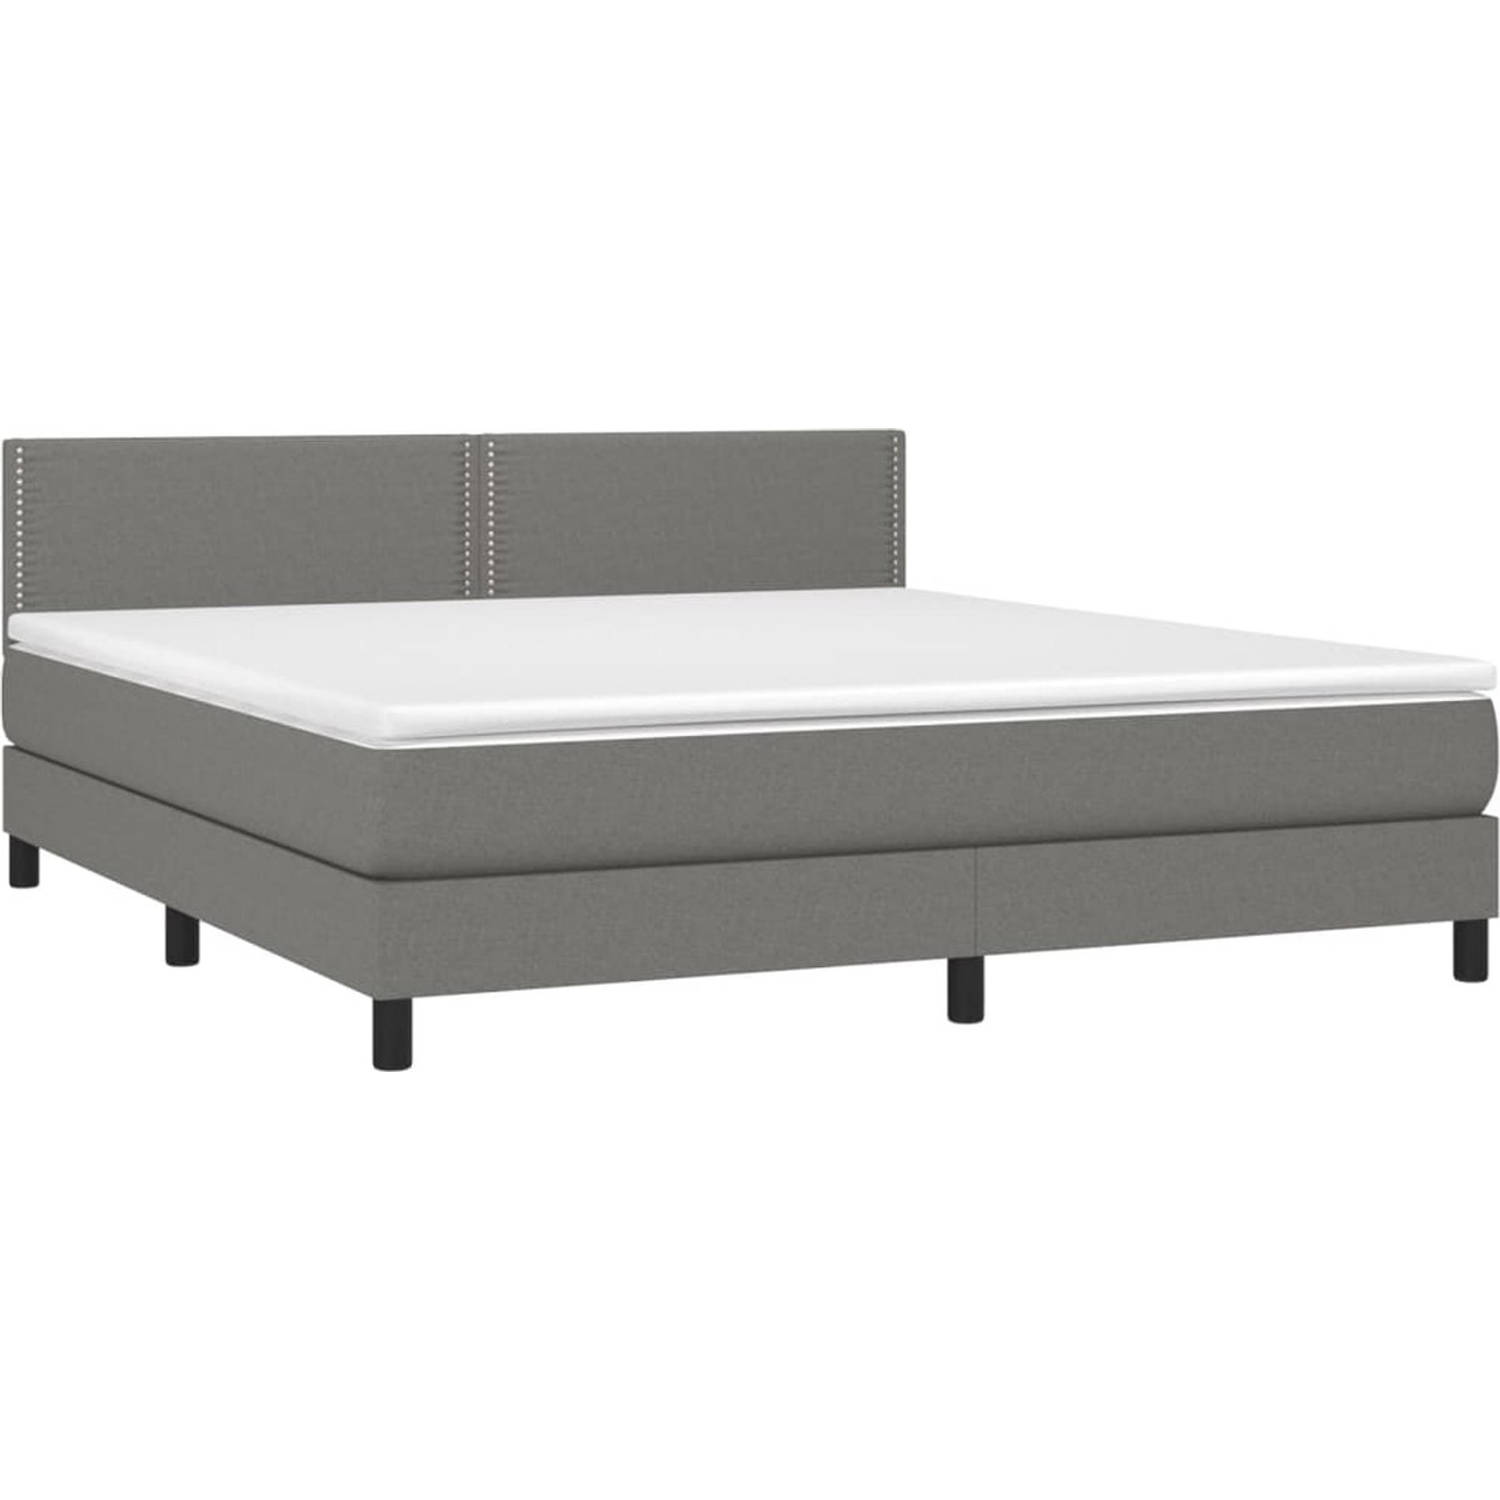 The Living Store Boxspringbed - Comfort - Bed - 203x180x78/88 cm - Donkergrijs